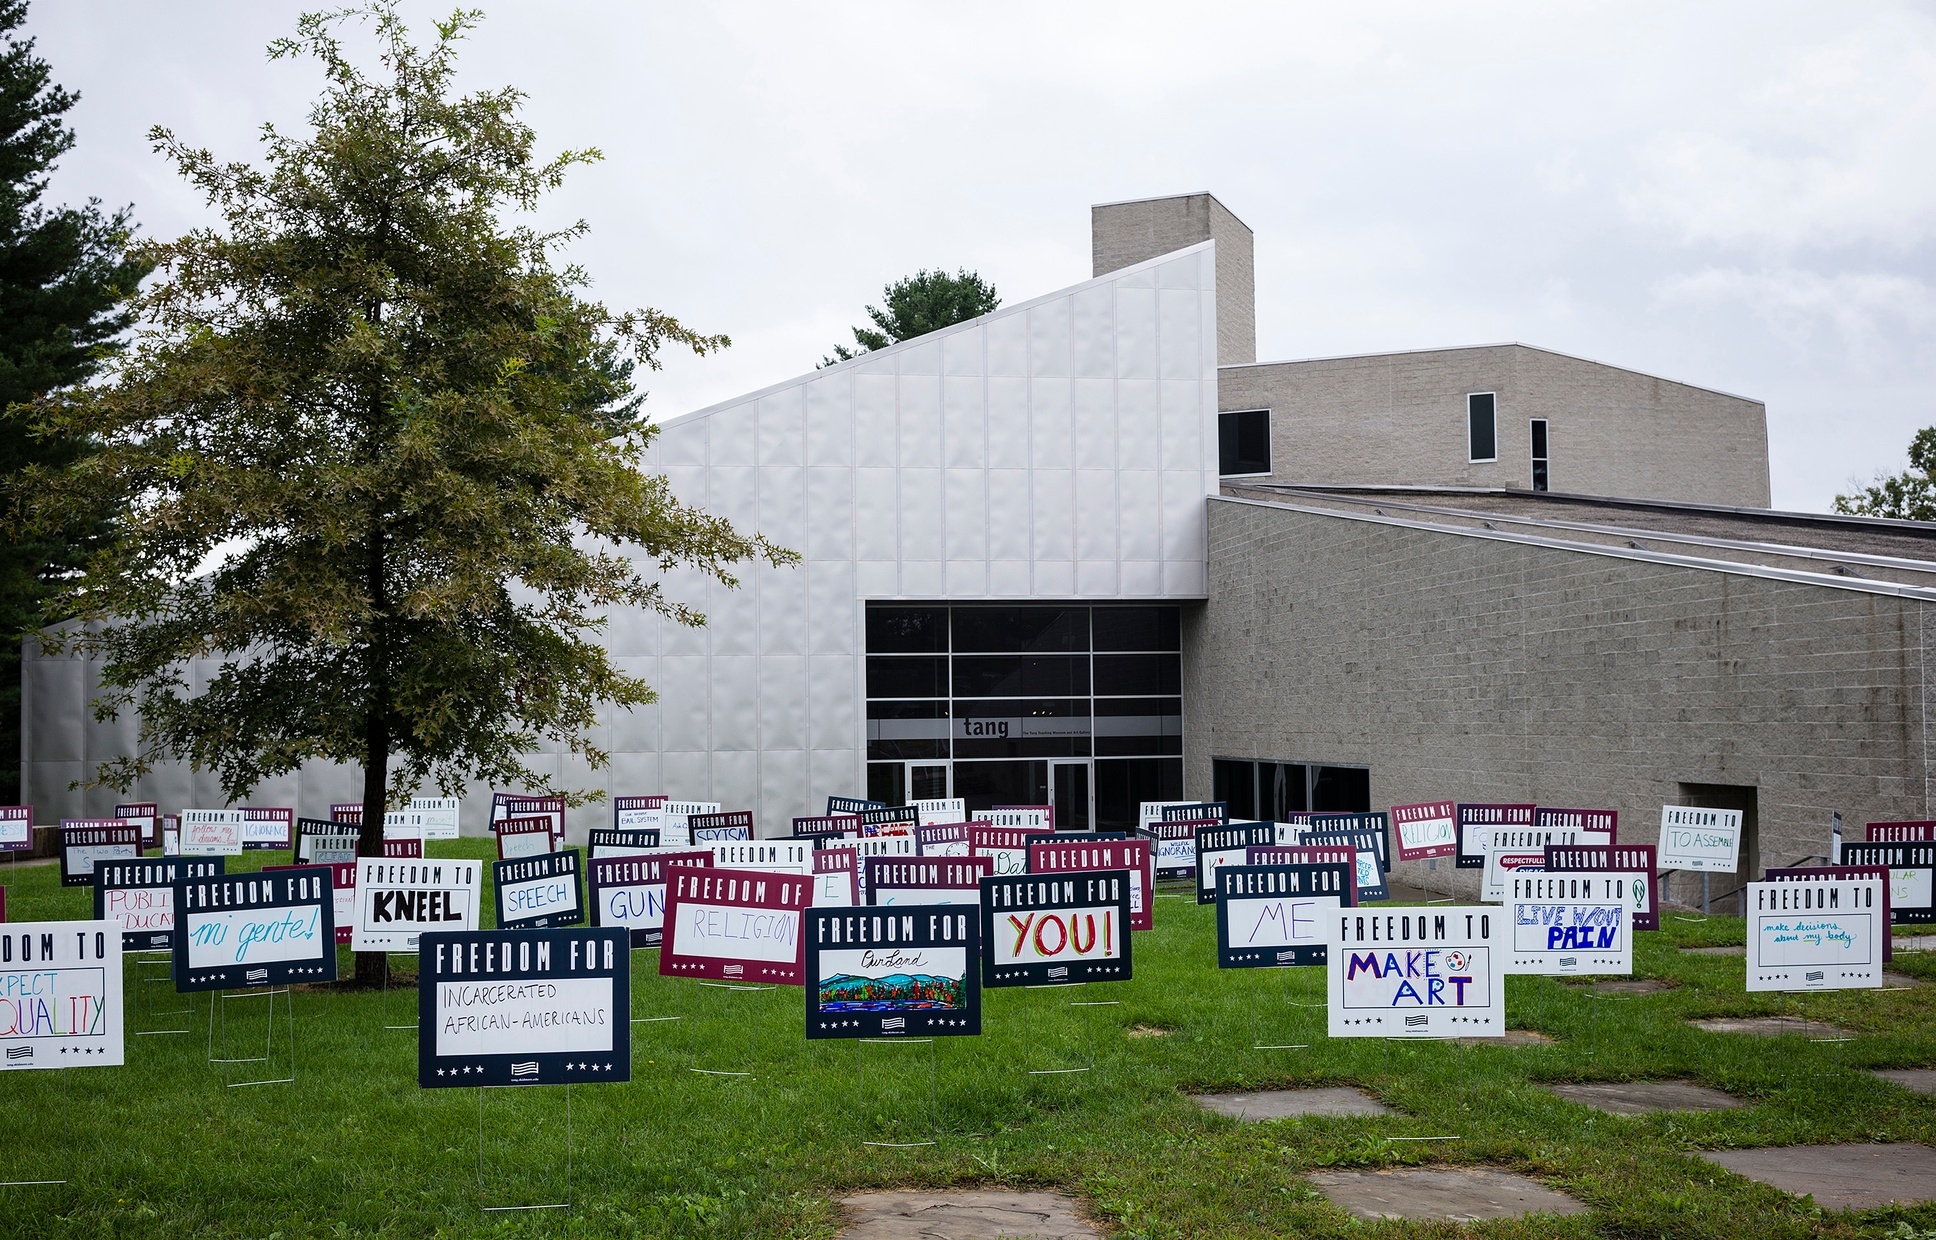 Numerous signs that say "Freedom for ___", "Freedom From ____", and "Freedom of ____" stuck into a lawn in front of a gray, angular building.